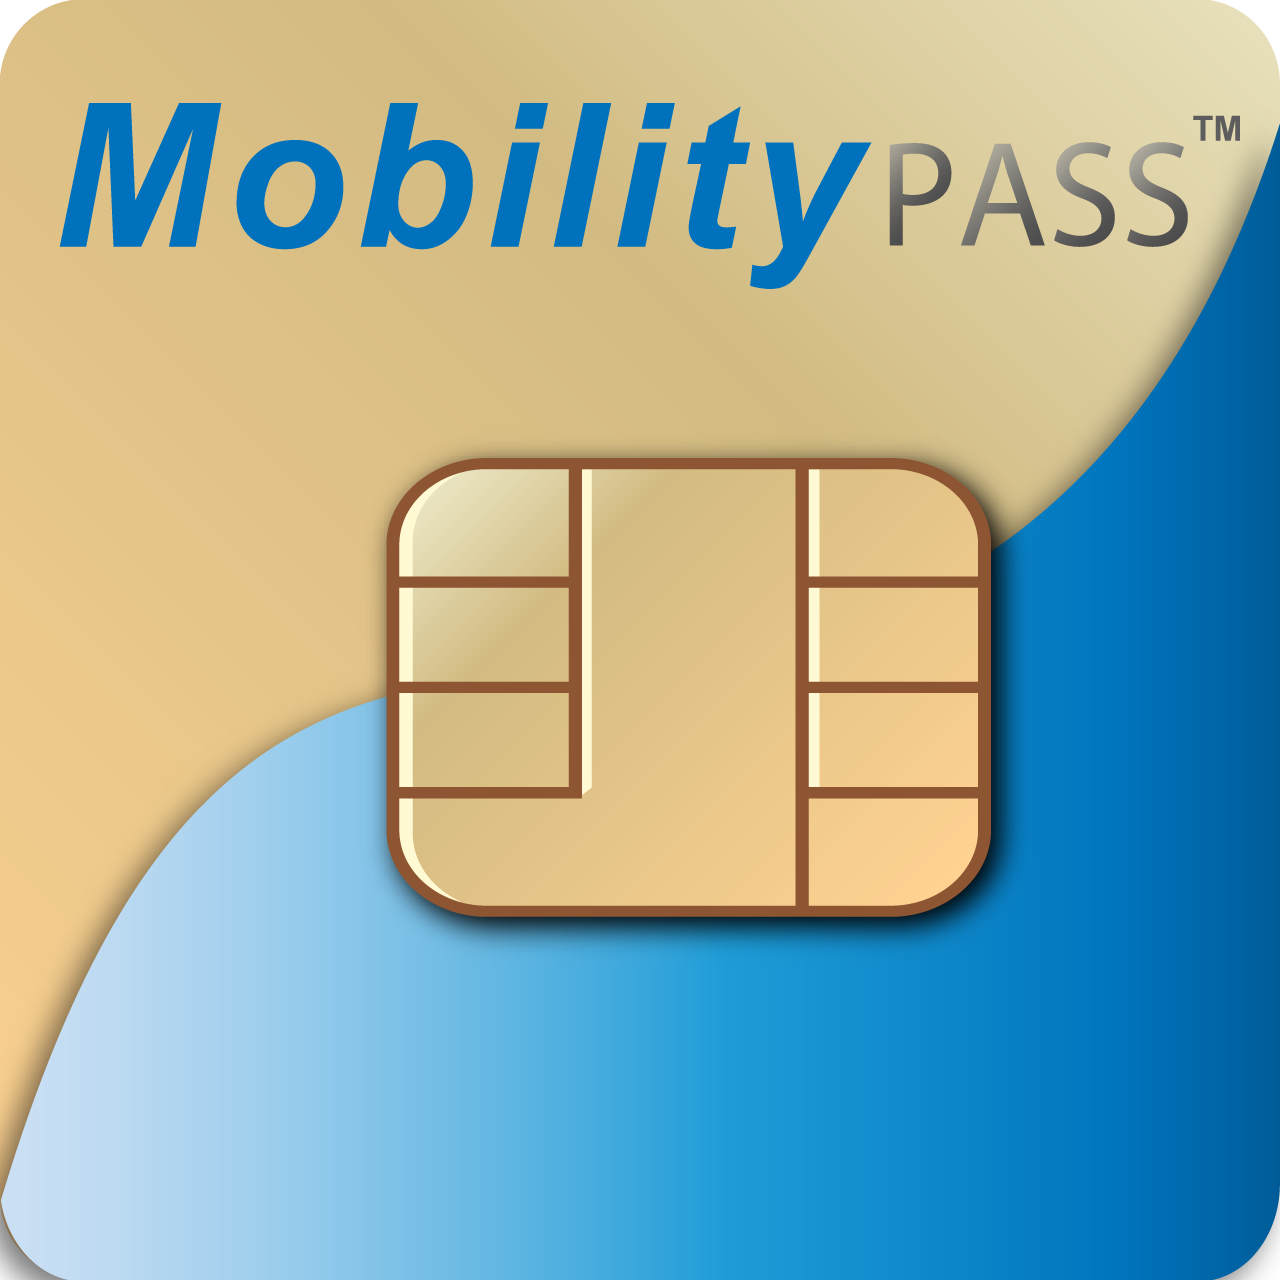 MobilityPass Global official web